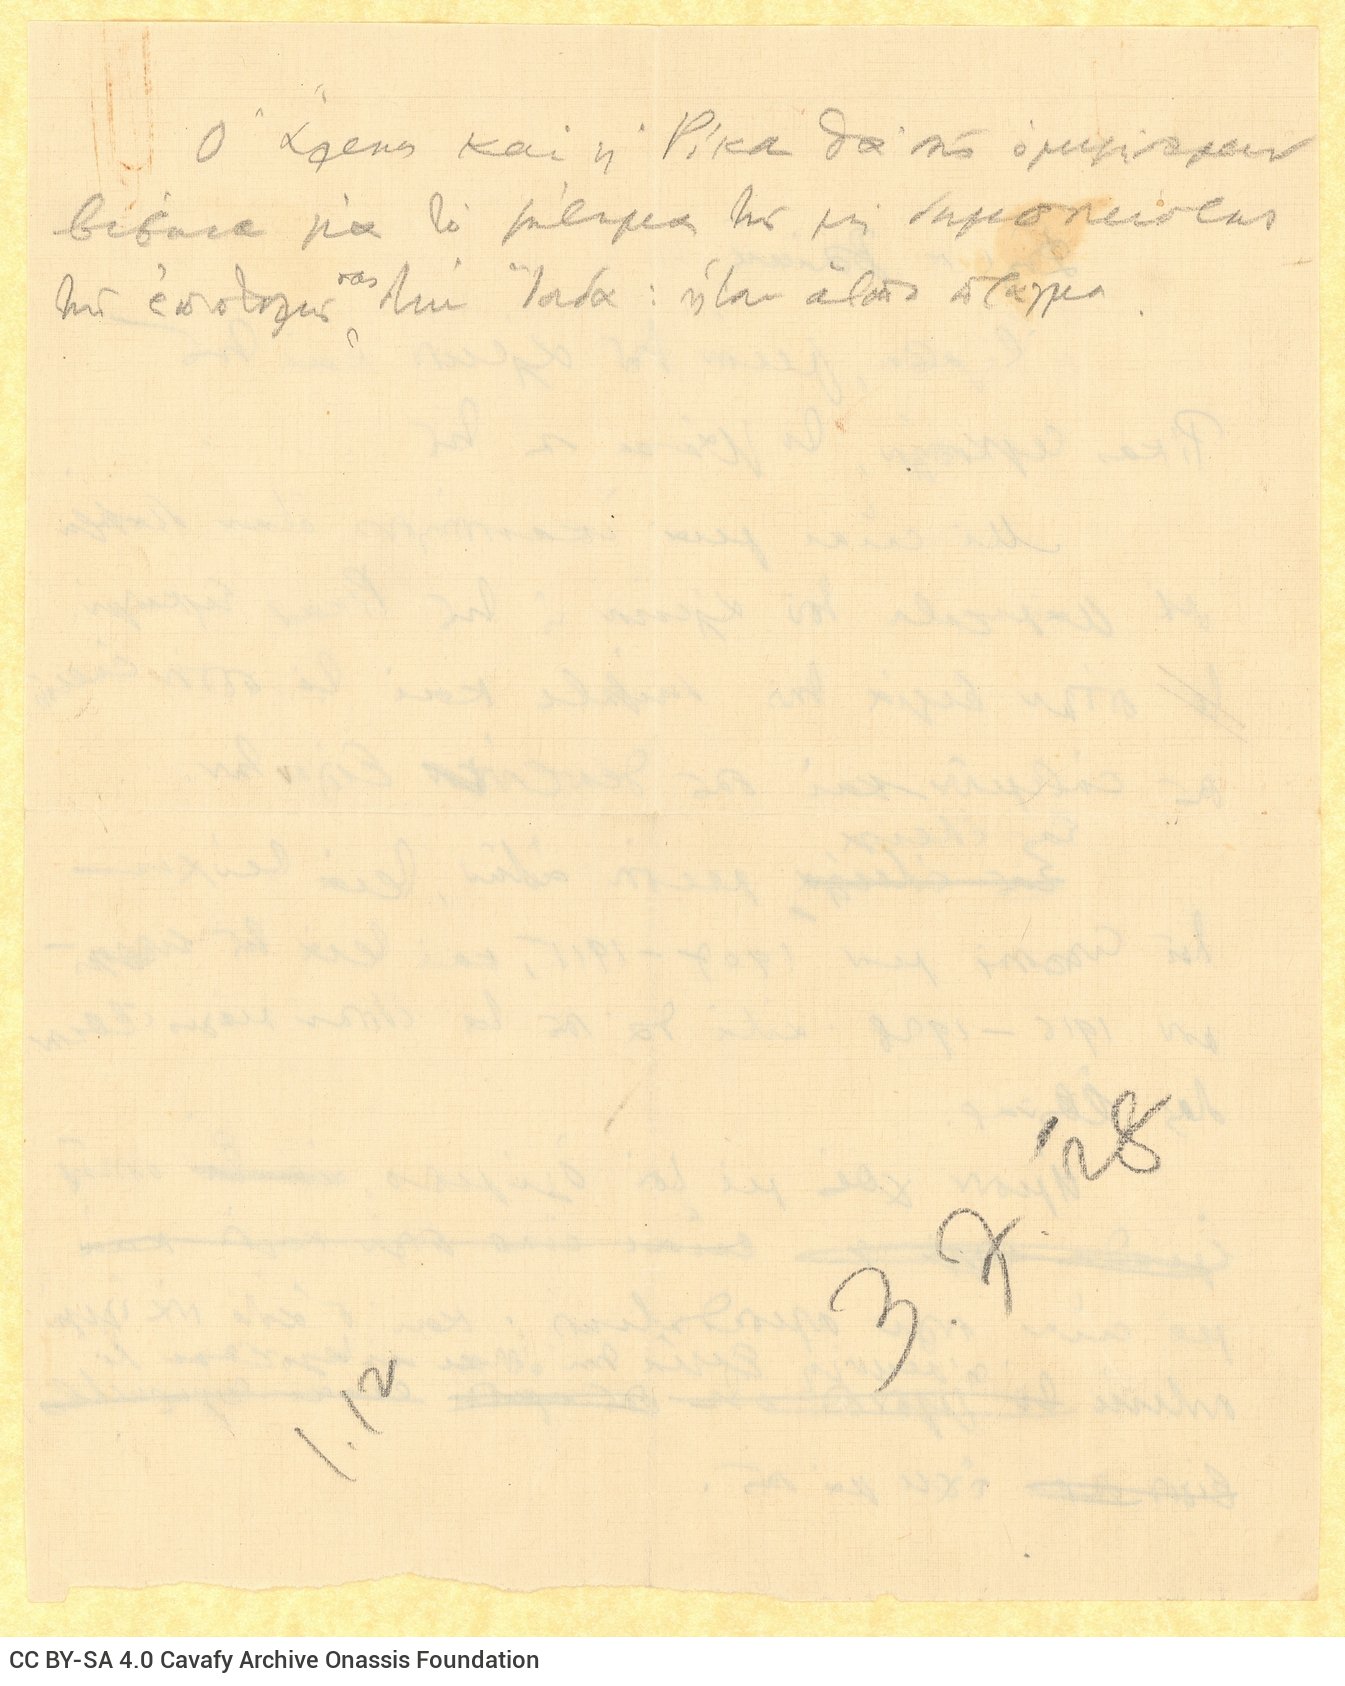 Handwritten draft letter by Cavafy to Marios [Vaianos] on both sides of a sheet. The poet informs him regarding the despatch 